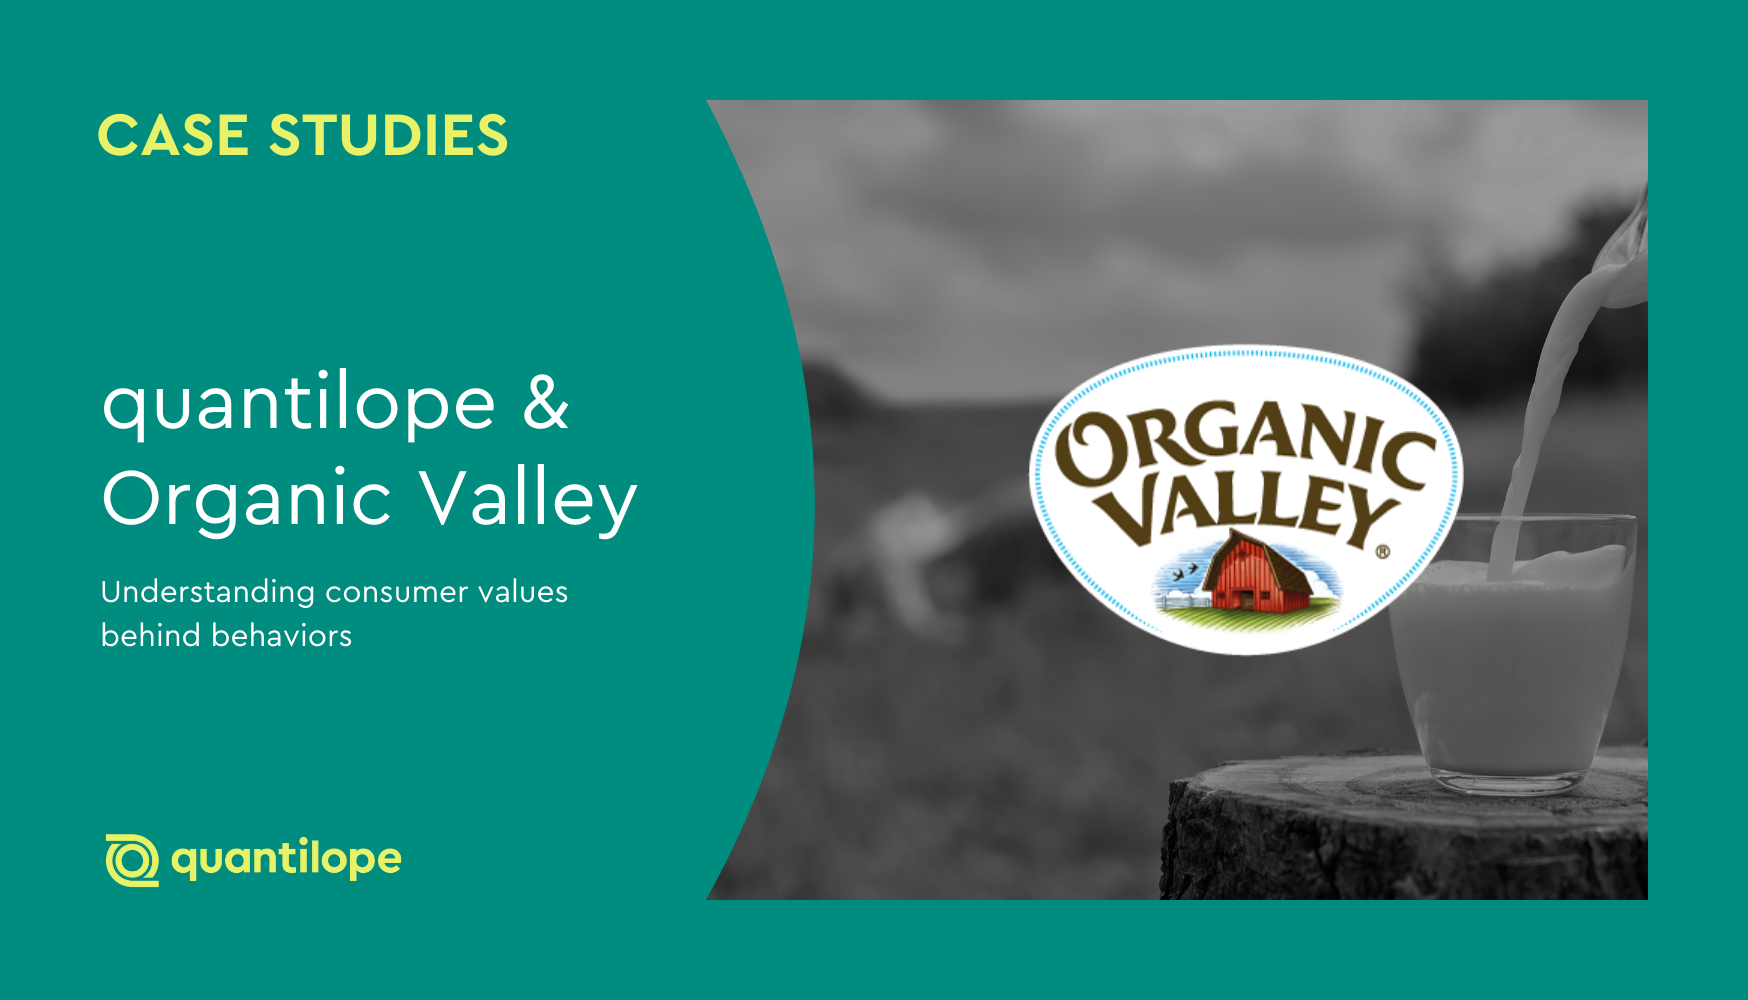 green background with black and white image of someone pouring milk and organic valley logo on top